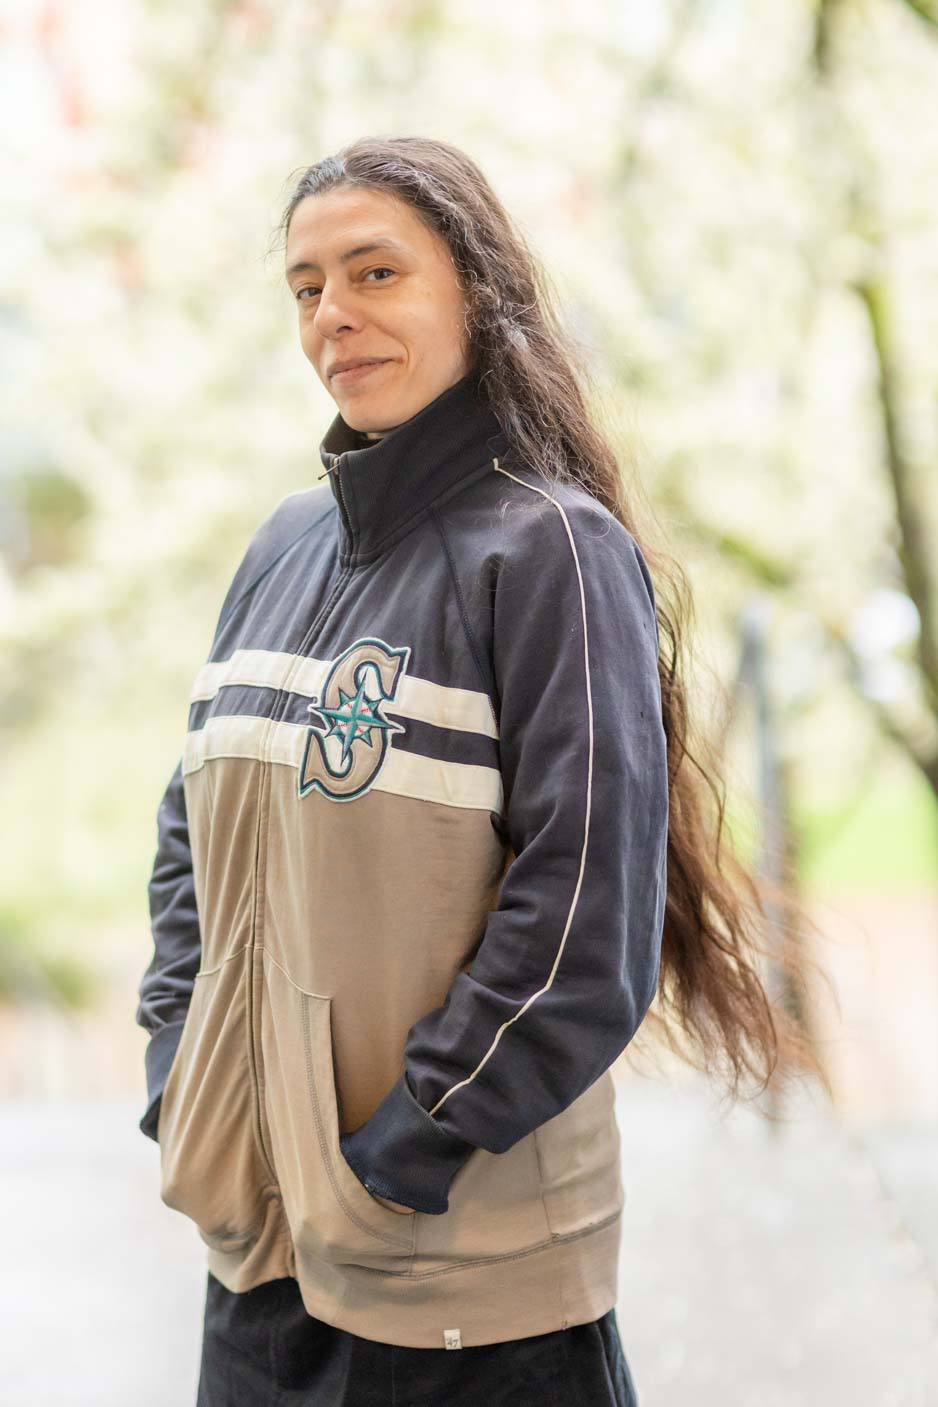 Saunatina Sanchez, candidate for Seattle City Council Position 8 is wearing a Seattle Mariners jacket with her hands in her pockets.  She has long dark hair and dark eyes and is looking directly at the camera.  